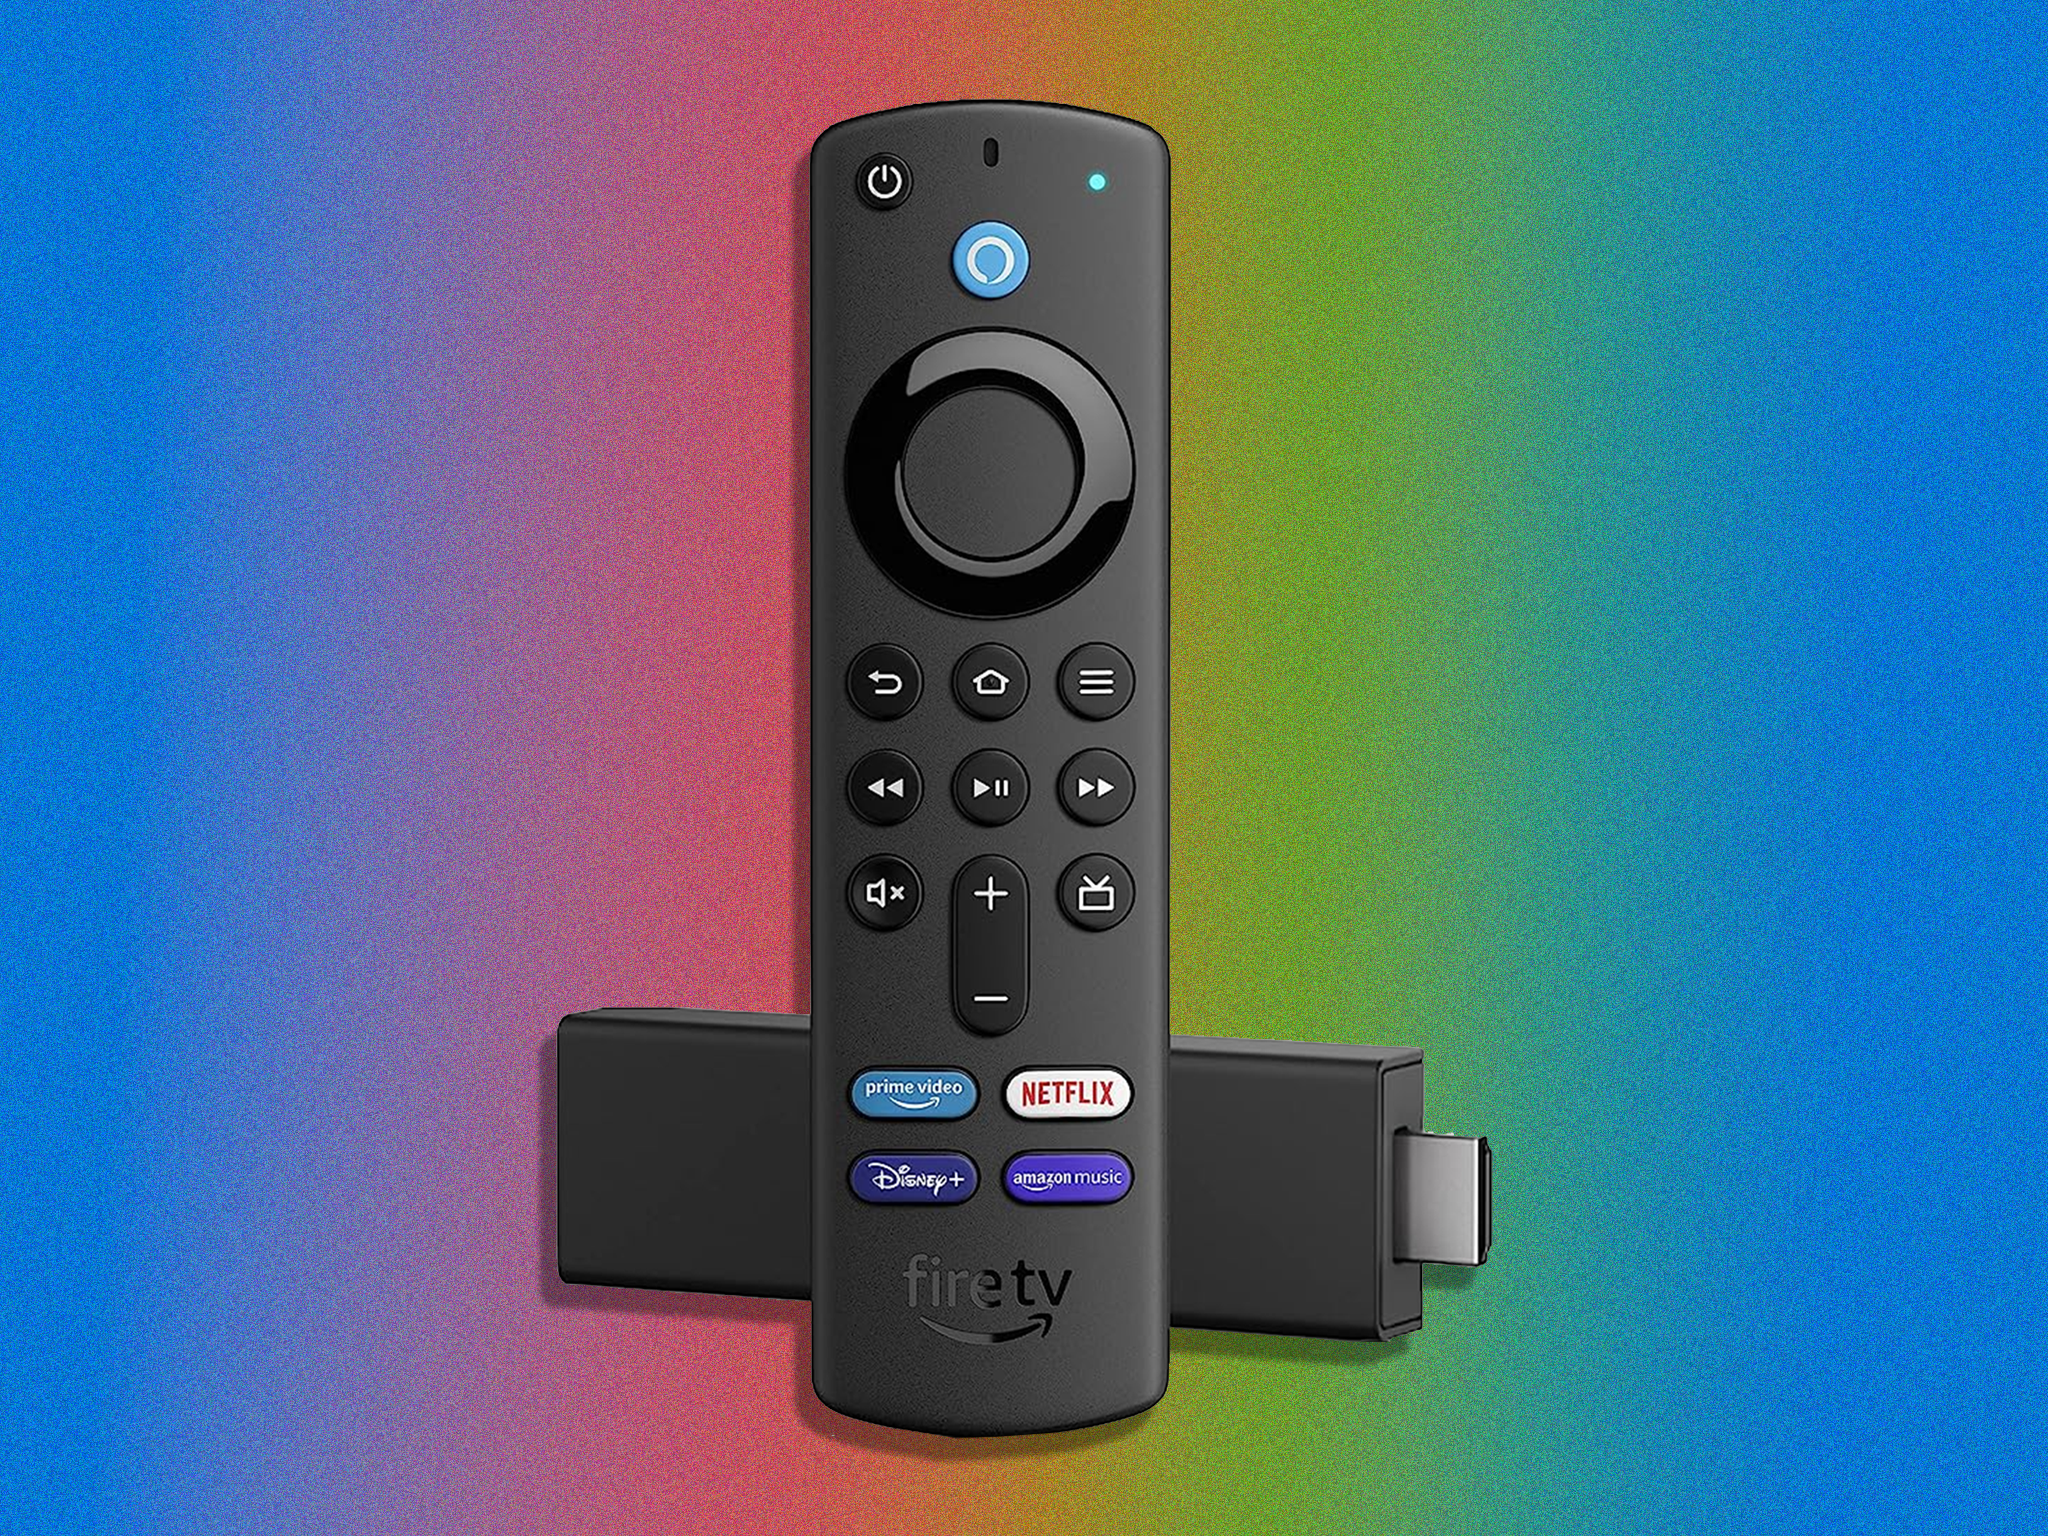 Amazon Fire stick deals in Prime Day sale | The Independent